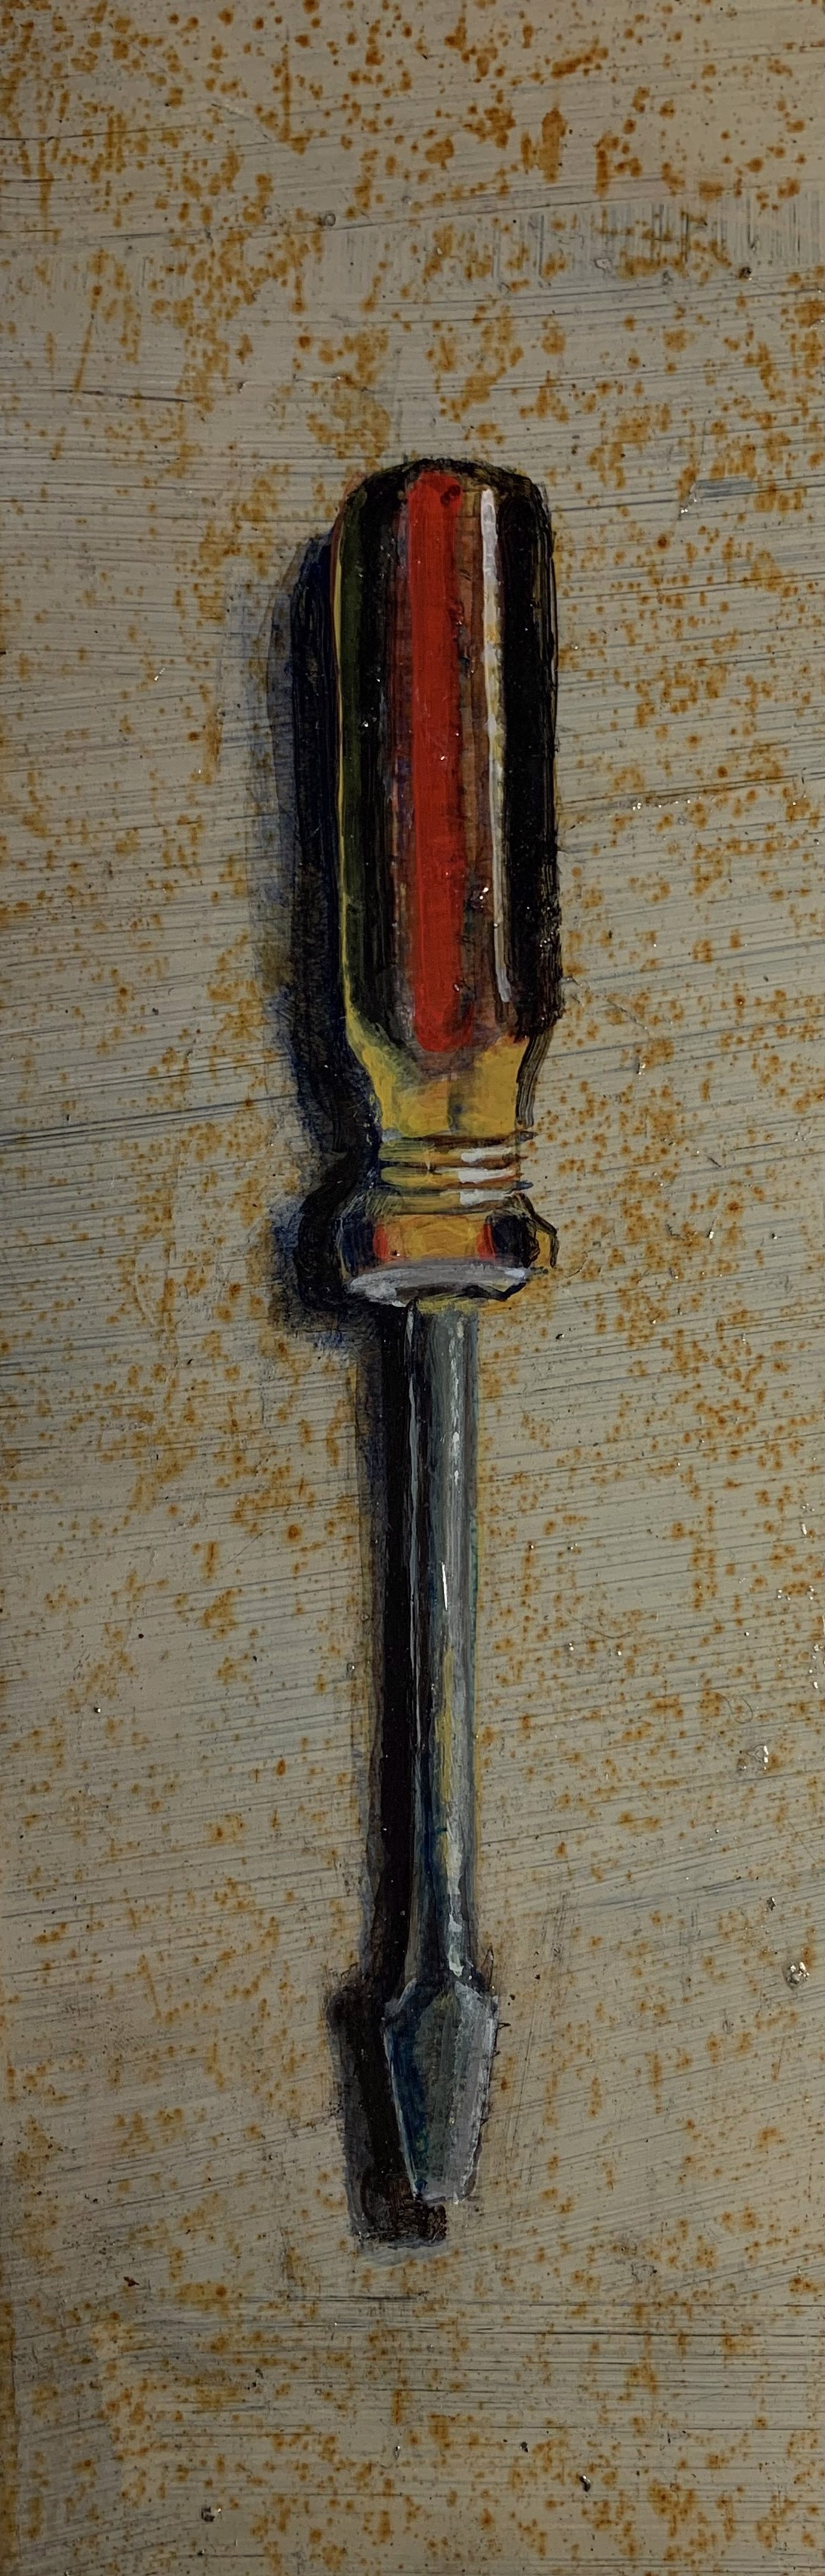 Red and Yellow Screwdriver by Jill Torberson